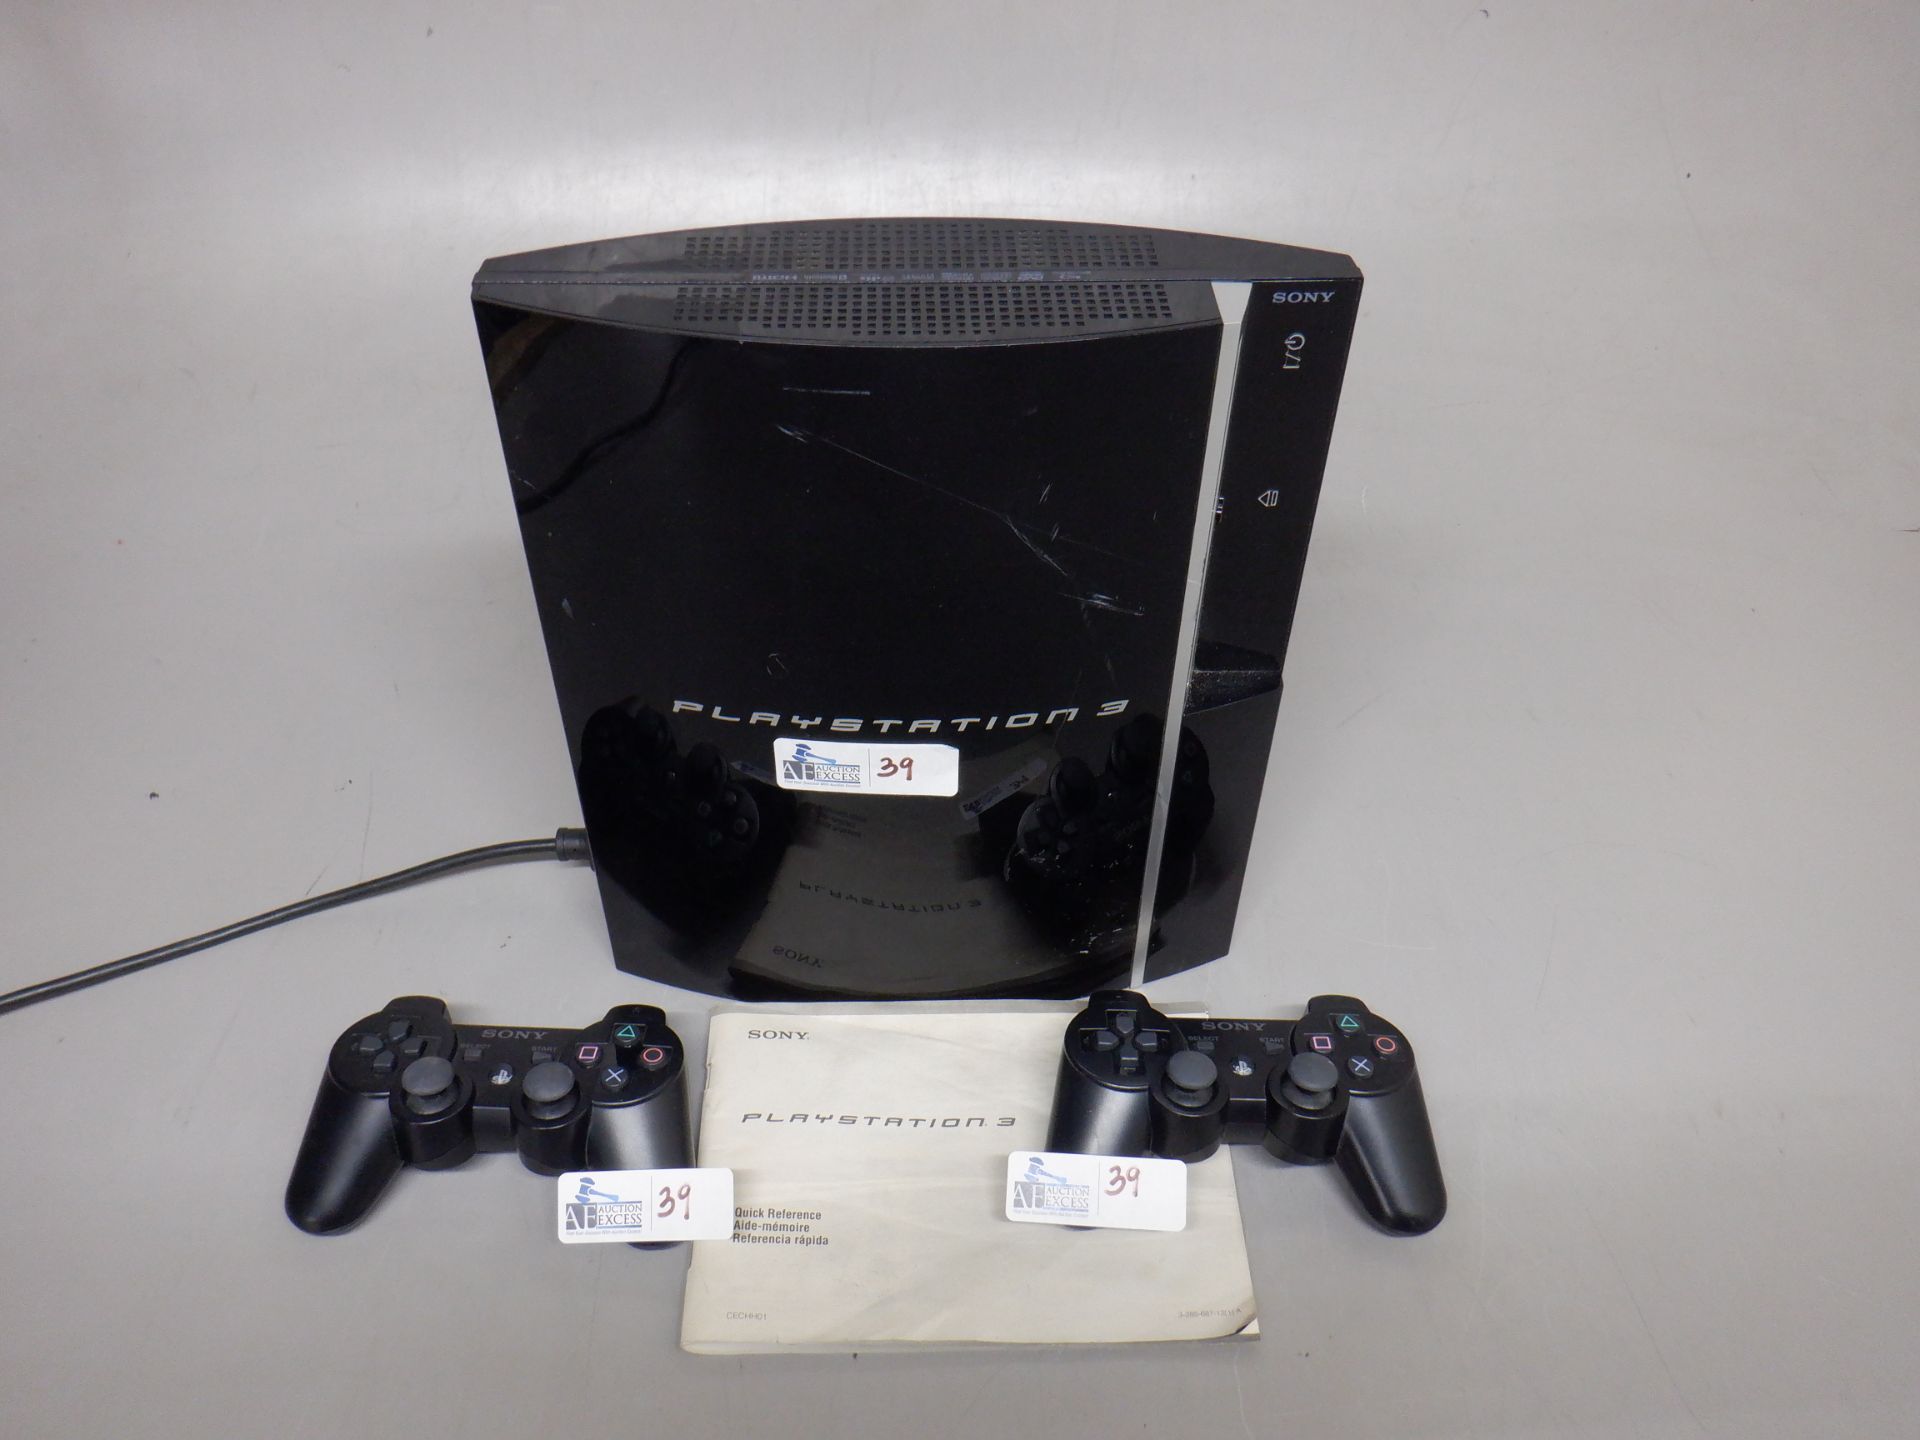 PLAYSTATION 3 WITH CONTROLLERS - Image 2 of 5